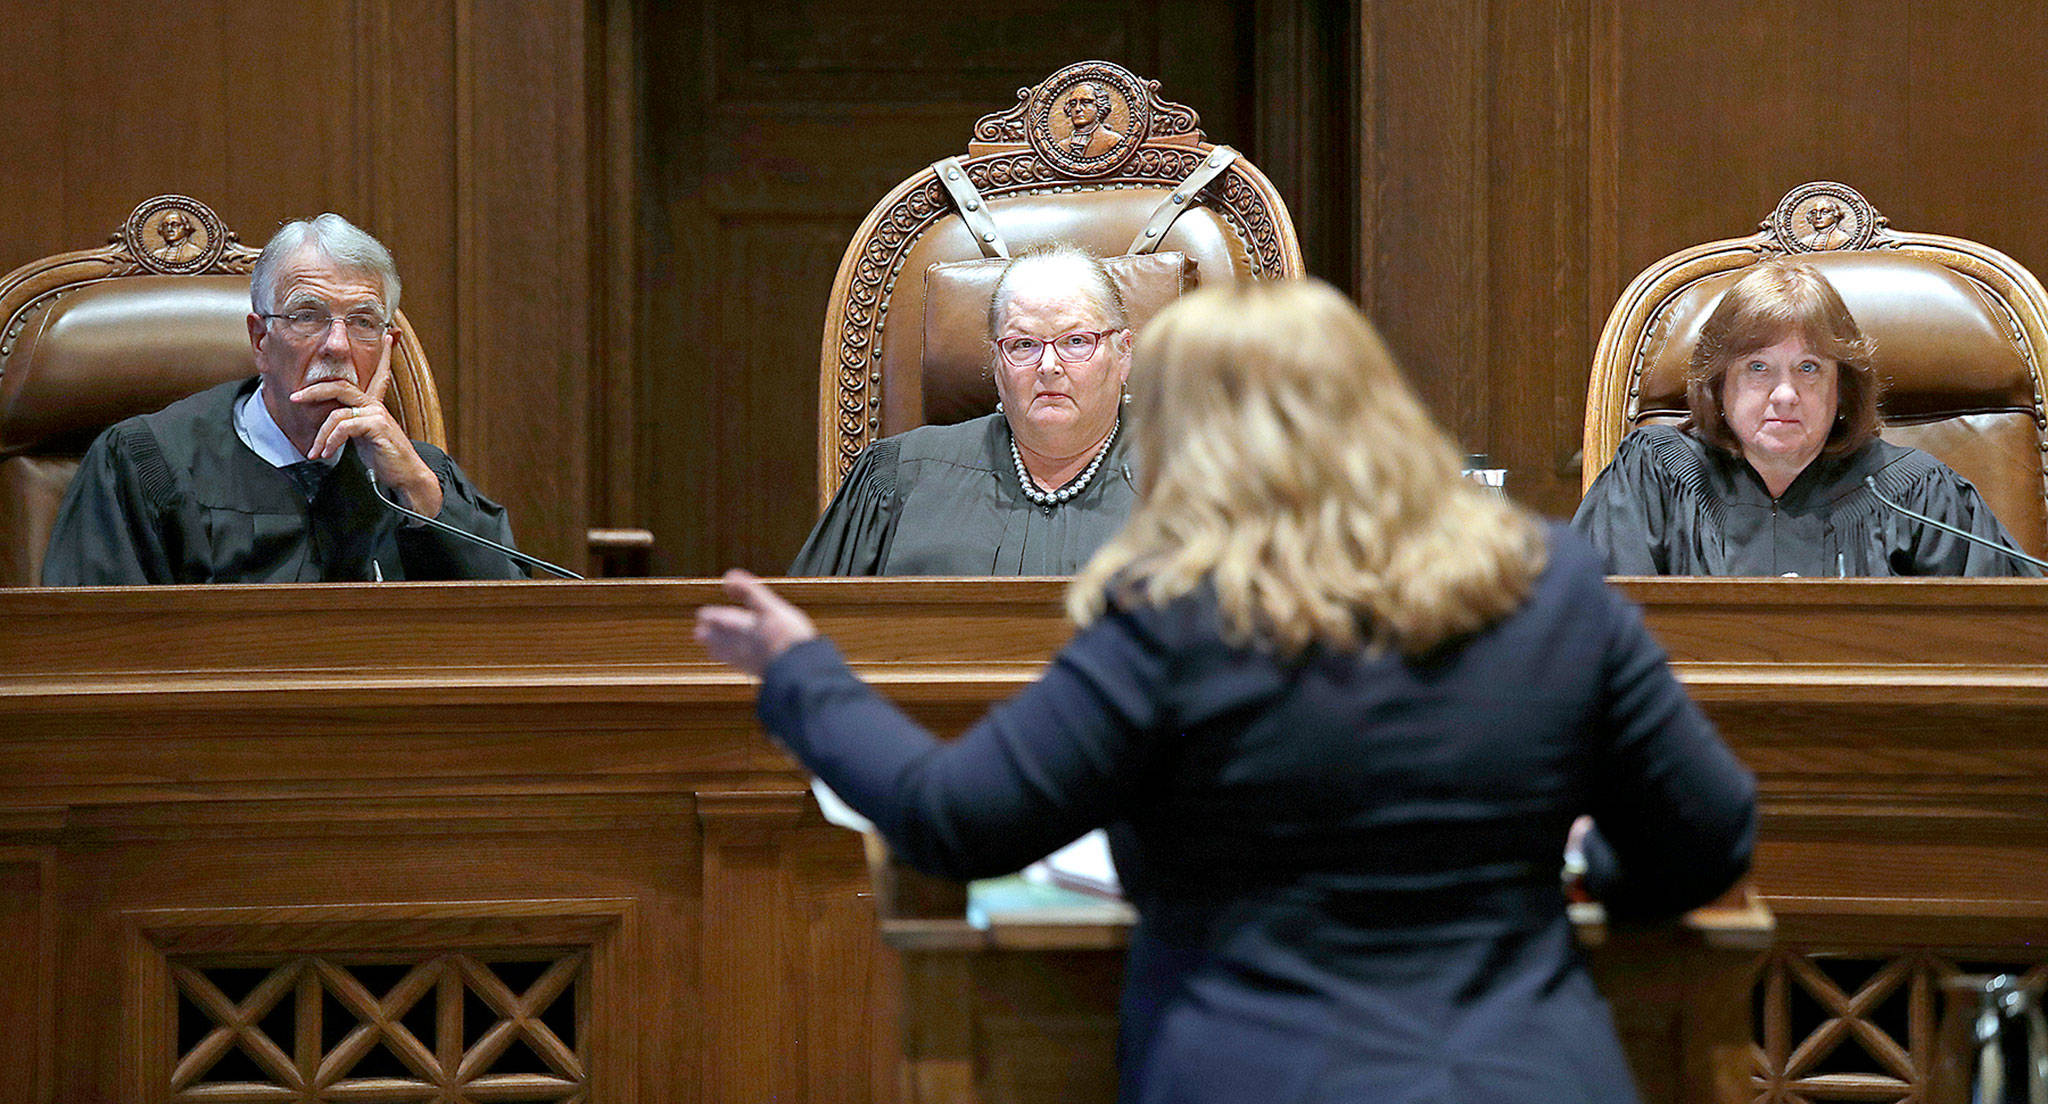 From left, Justice Charles W. Johnson, Chief Justice Mary E. Fairhurst and Justice Barbara A. Madsen listen to Michele Earl-Hubbard, the attorney for a media coalition, during a hearing before the Washington Supreme Court on Tuesday in Olympia. (AP Photo/Elaine Thompson)